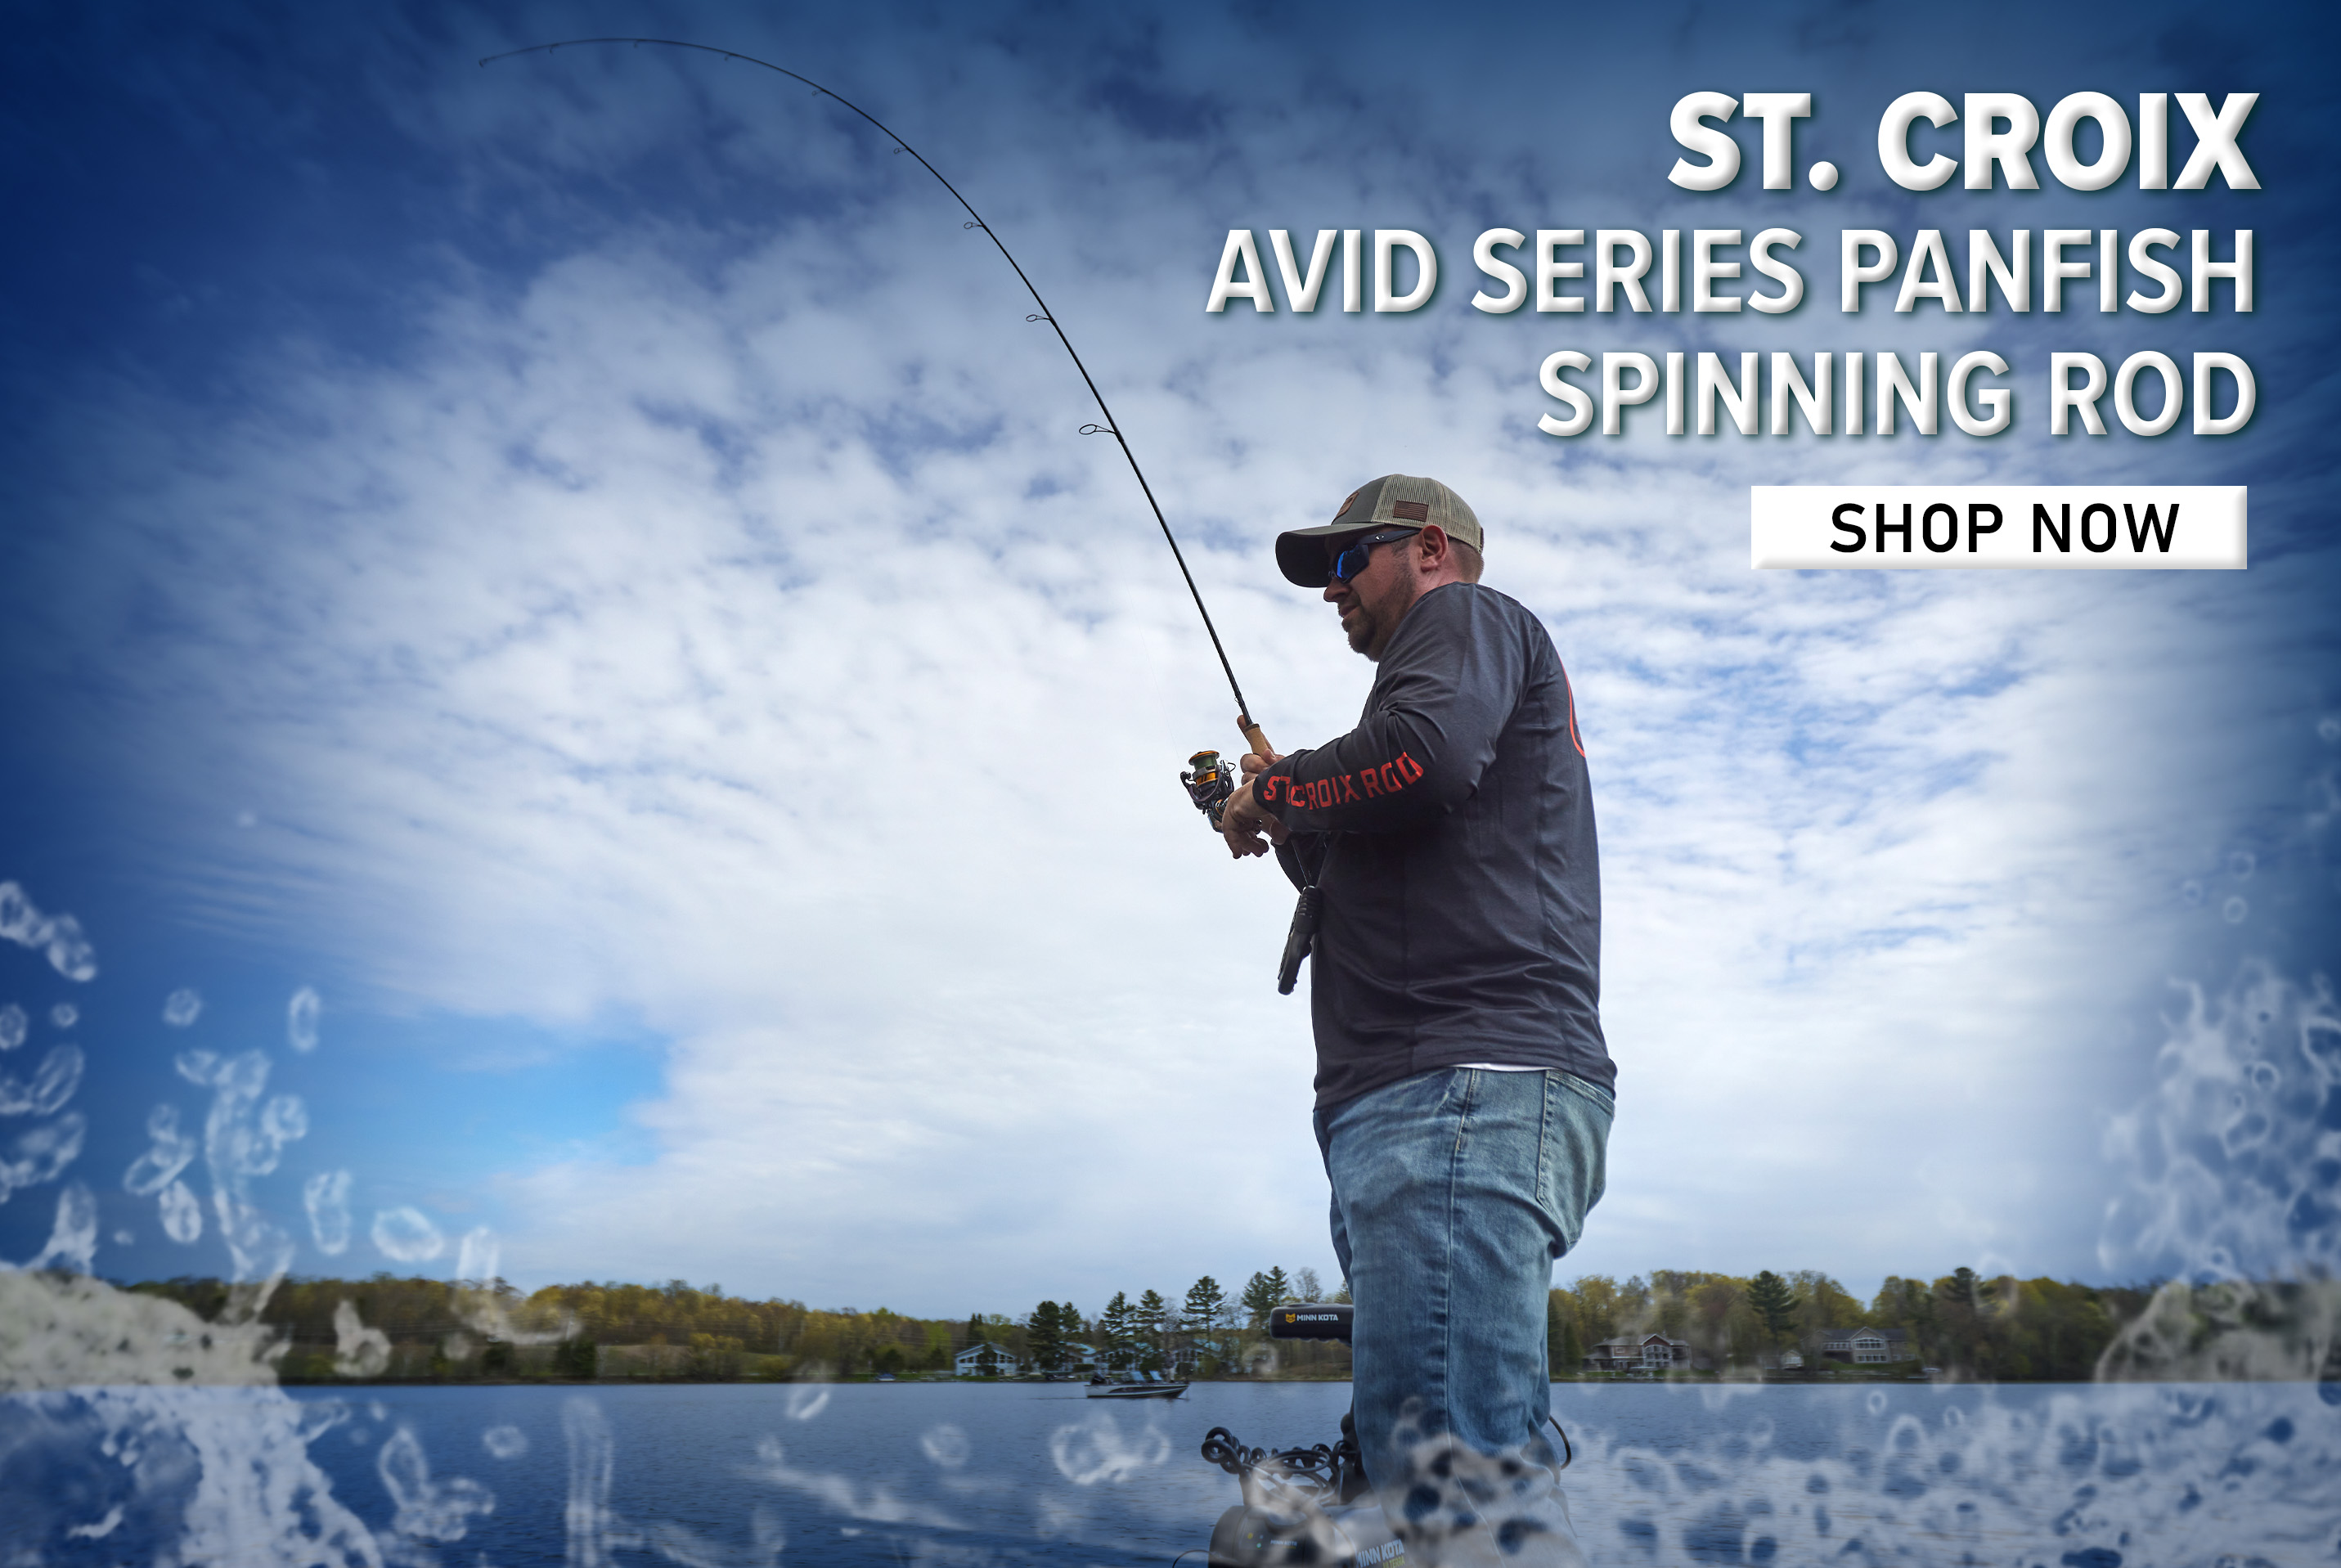 New St. Croix Avid Panfish & Avid Walleye IN STOCK NOW! - Fish USA